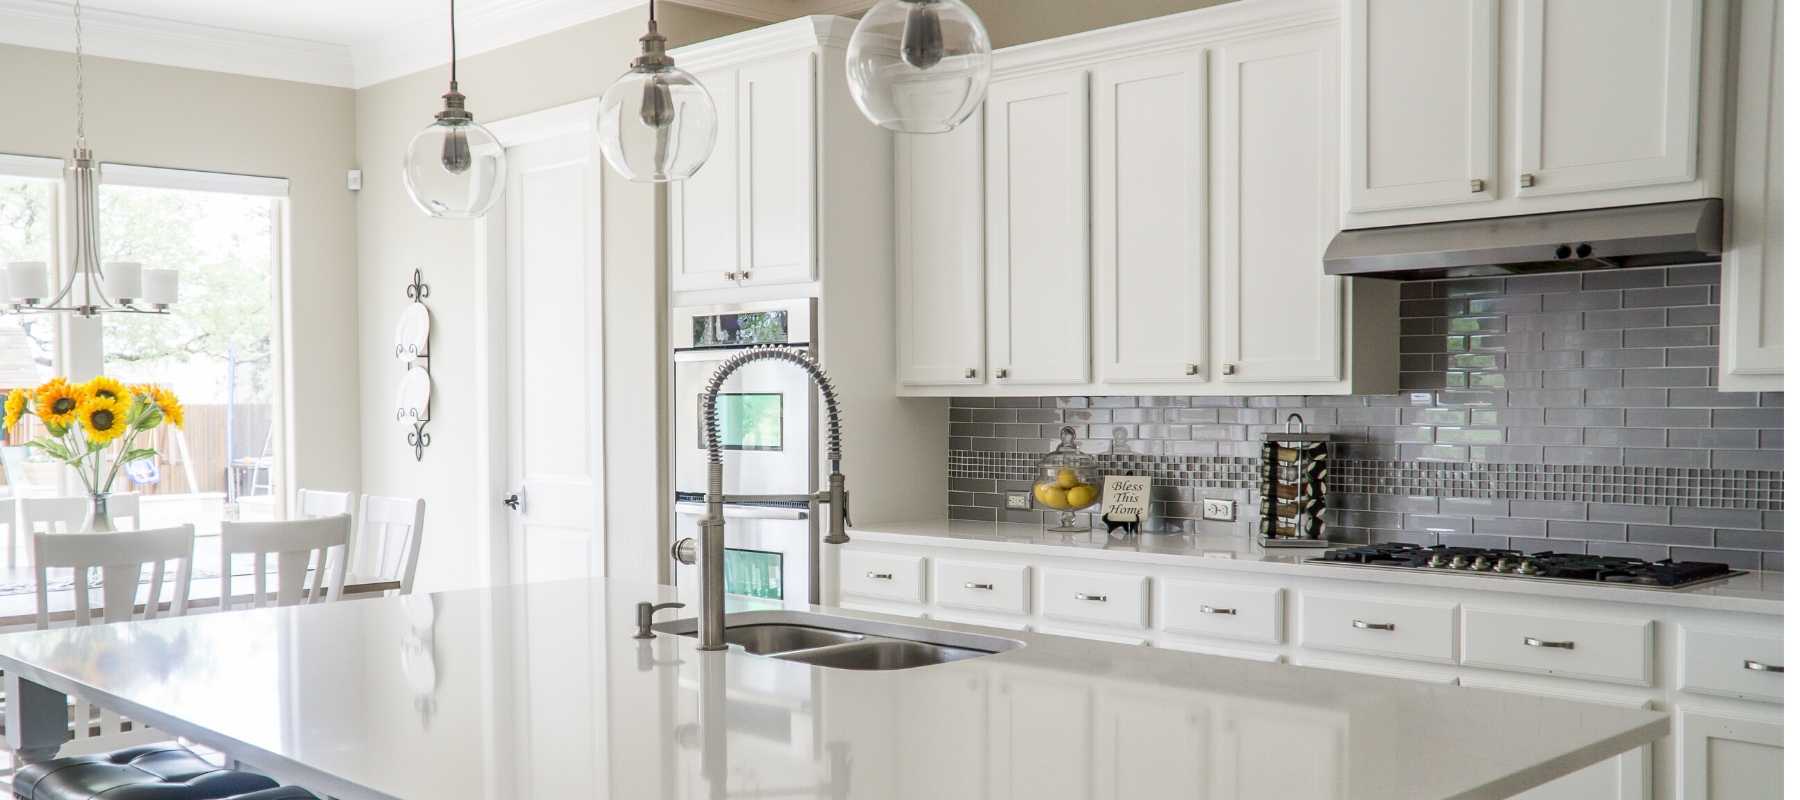 White kitchen with glass hanging pendants